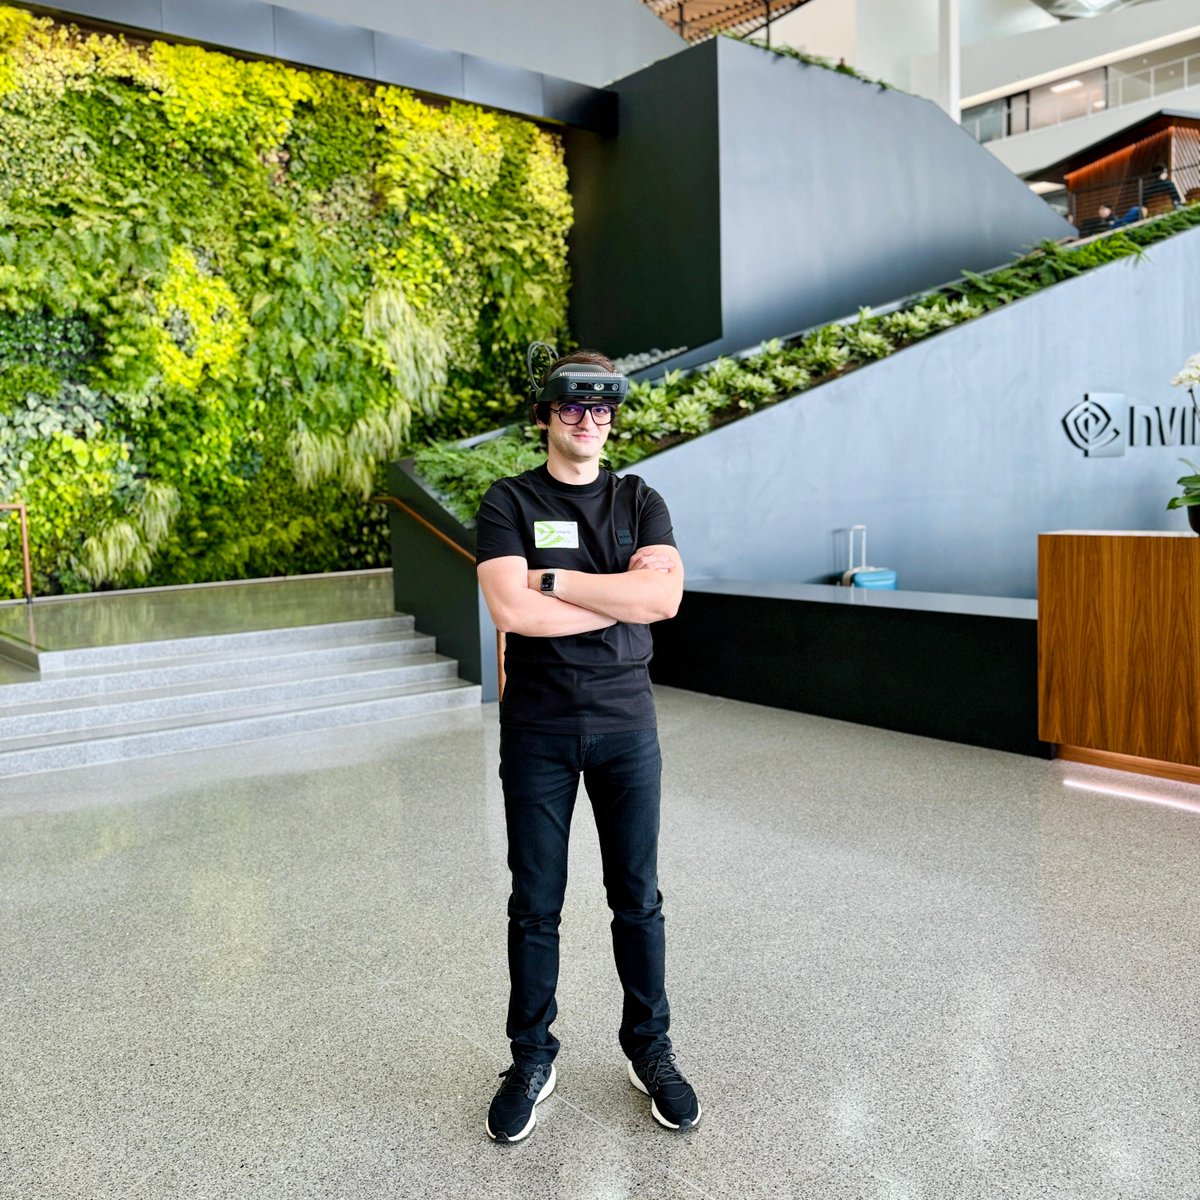 .lumen at the Nvidia HQ in Santa Clara, California! The Glasses and the Pedestrian Autonomous Driving AI behind are being showcased all over the world. More news are coming, stay tuned. #innovation #deeptech #AI